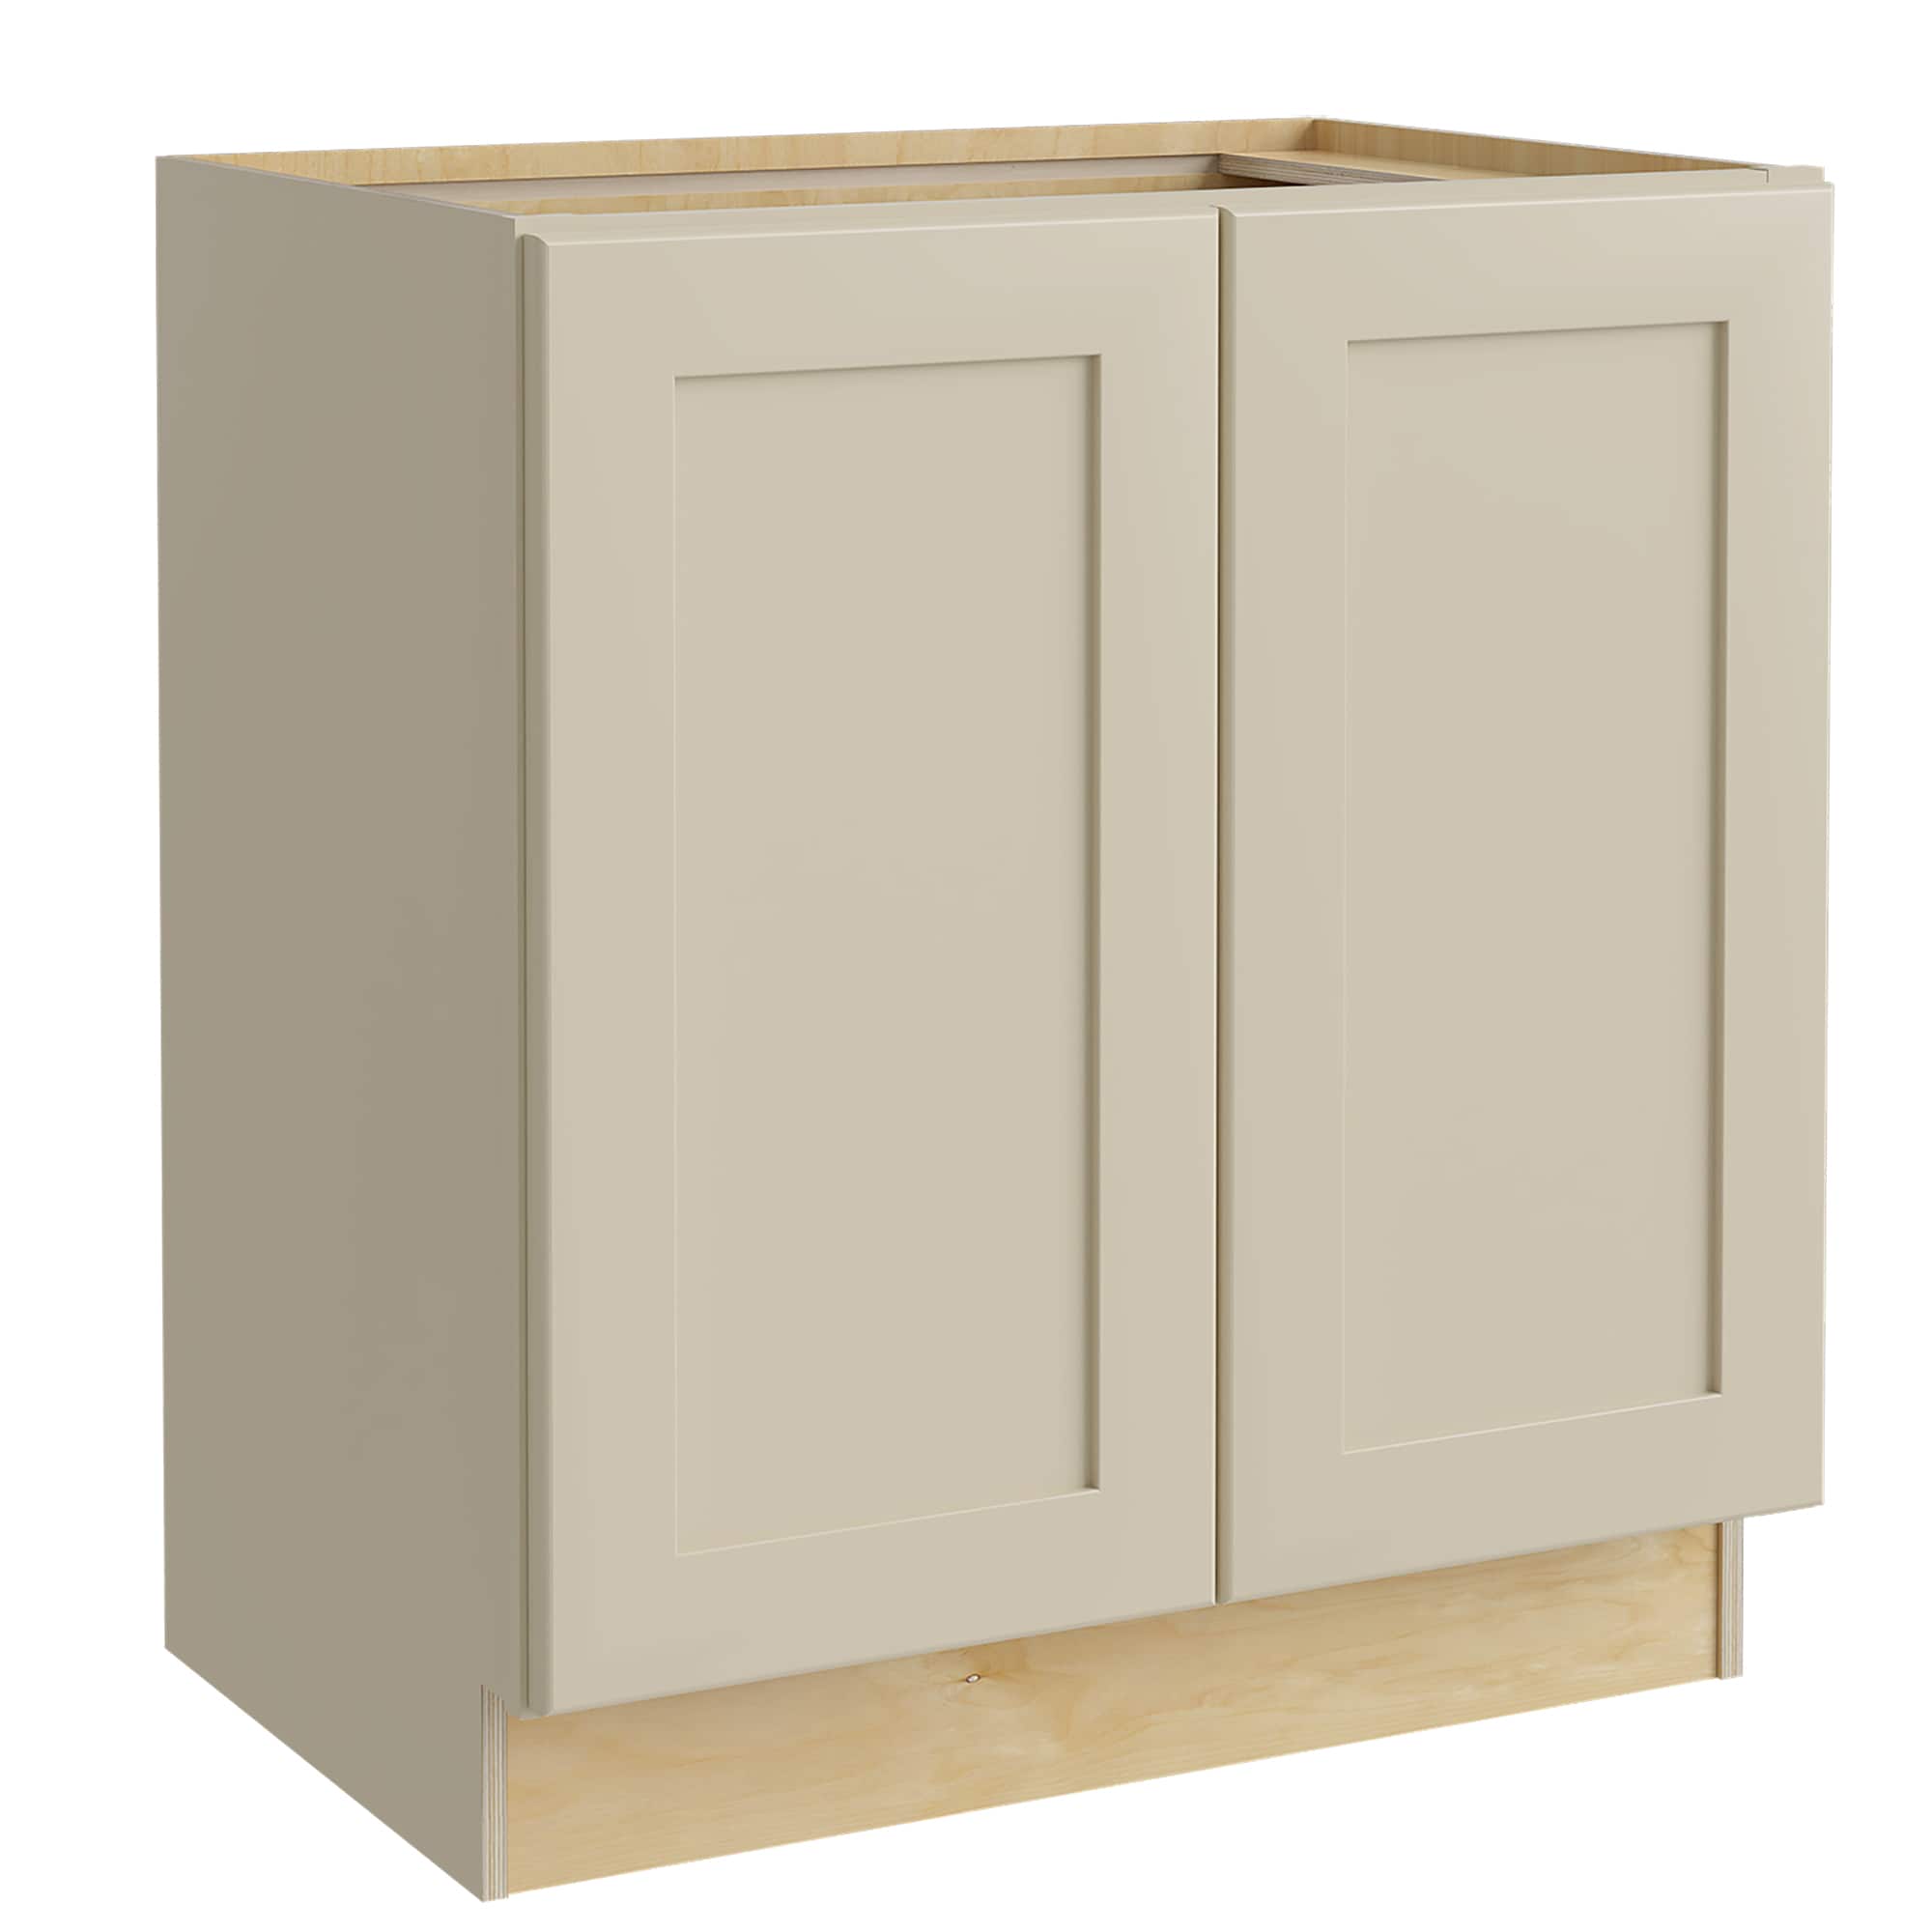 Luxxe Cabinetry 24-in W x 34.5-in H x 21-in D Norfolk Blended Cream Painted Door Base Fully Assembled Semi-custom Cabinet in Off-White | VB2421FH-NBC